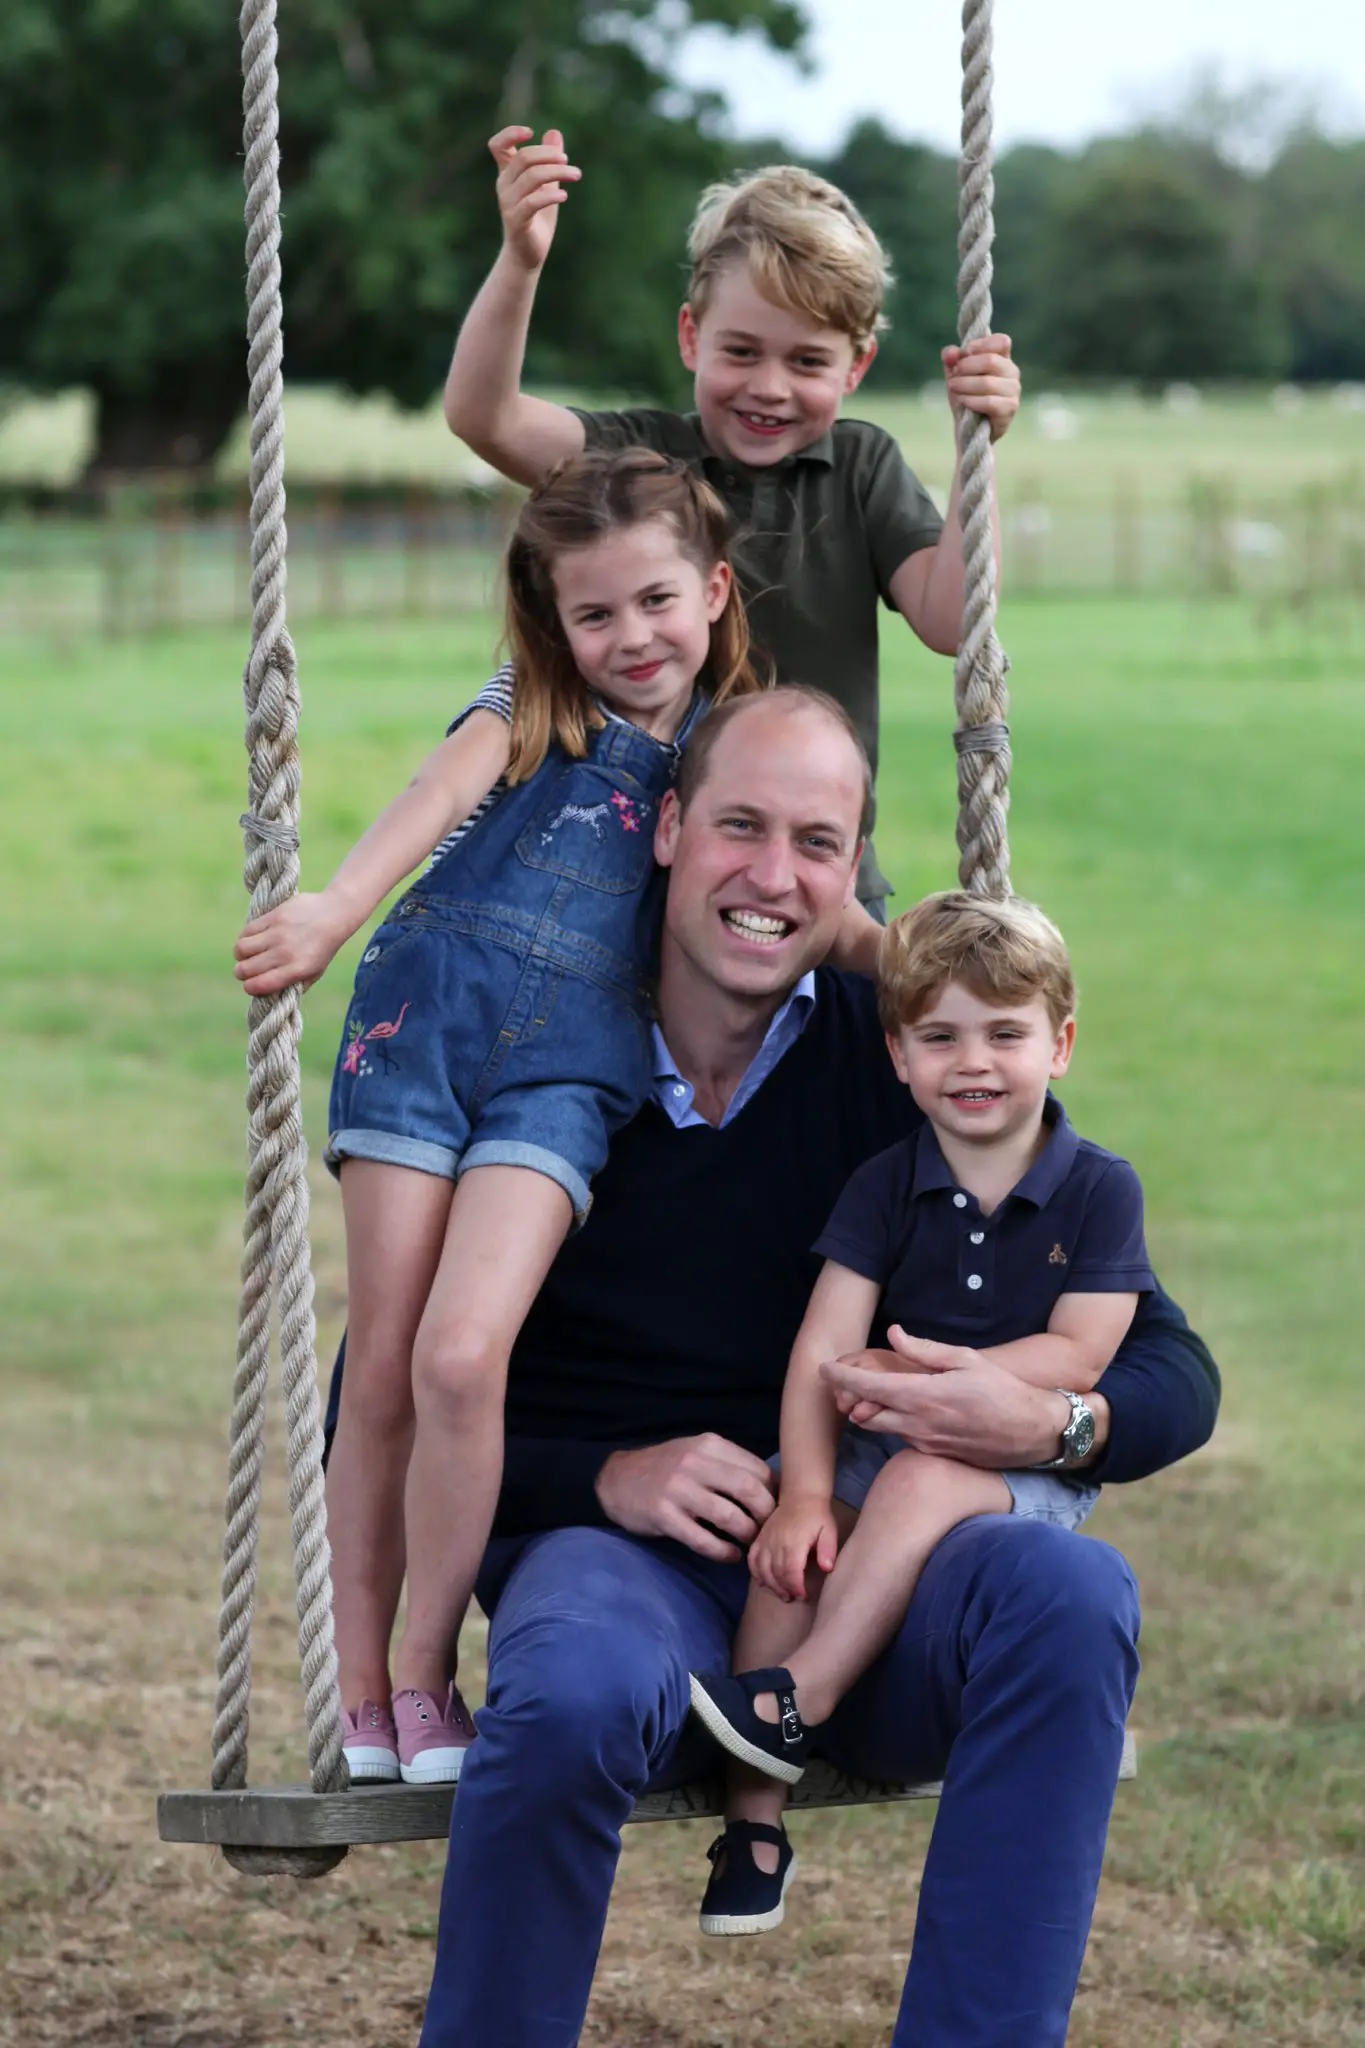 The Duke of Cambridge marked his 38th birthday with two family pictures with prince George, Princess Charlotte and Prince Louis